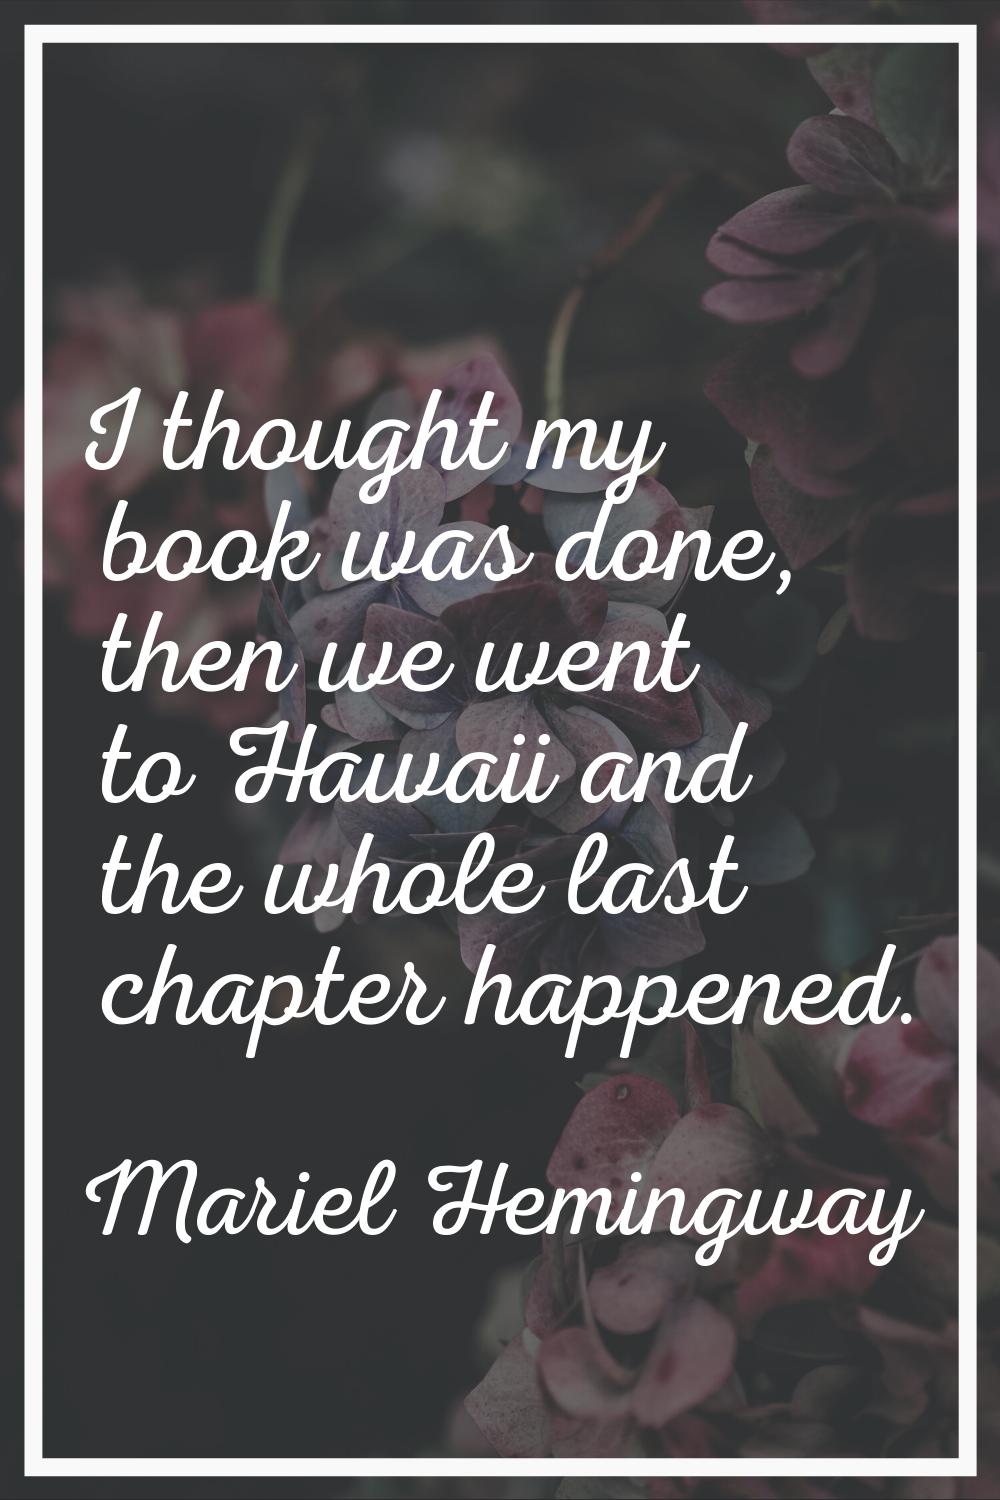 I thought my book was done, then we went to Hawaii and the whole last chapter happened.